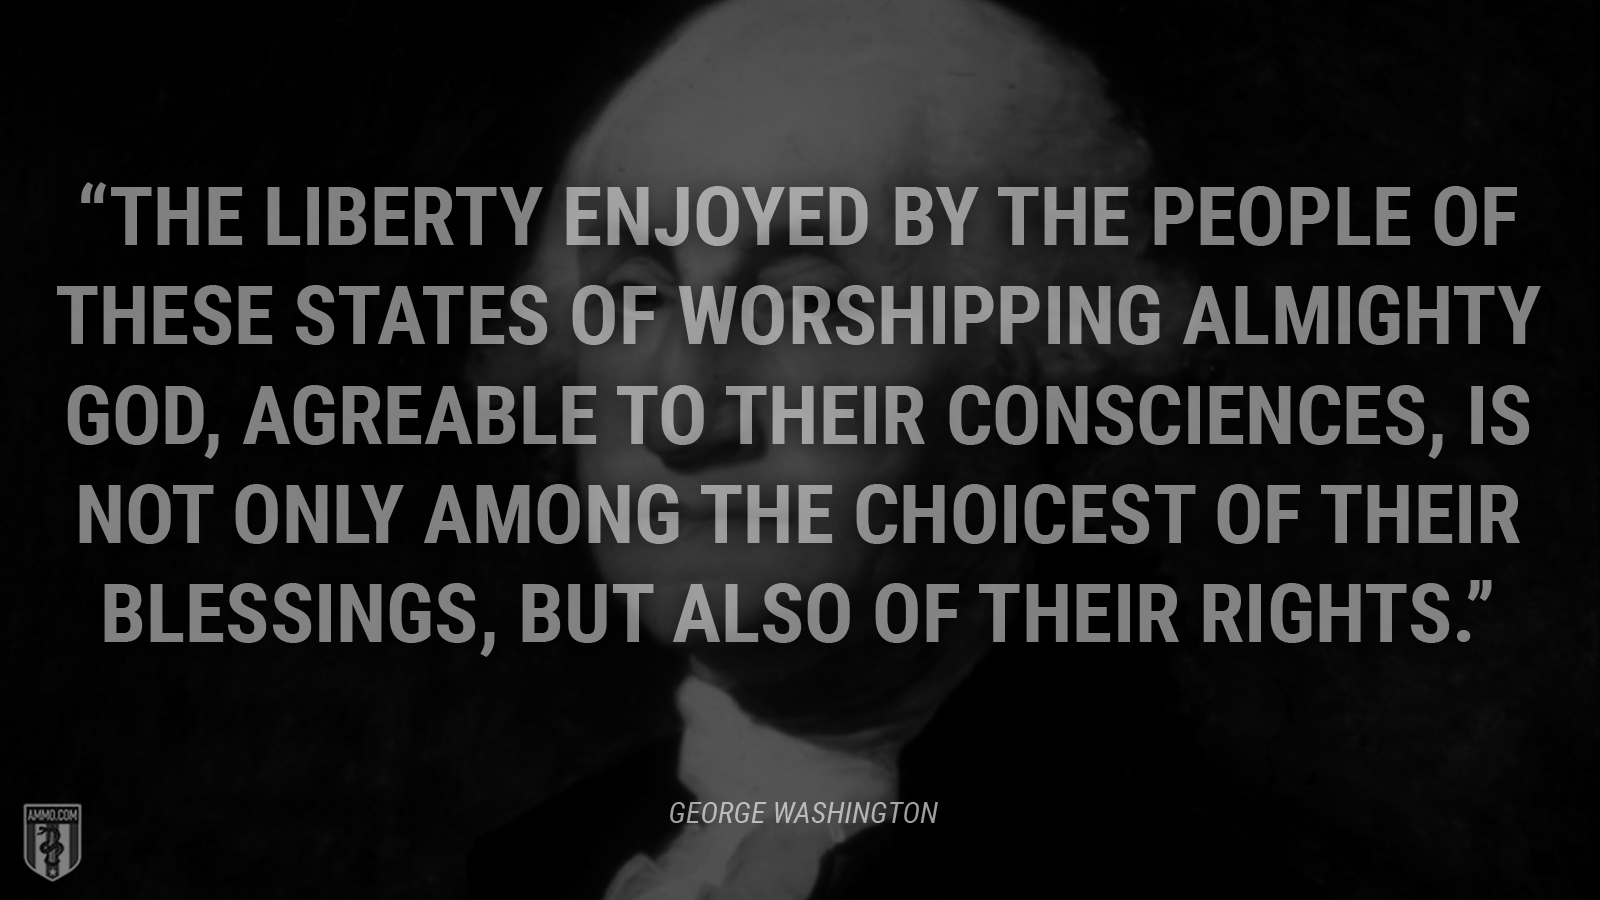 “The liberty enjoyed by the people of these States of worshipping Almighty God, agreable to their consciences, is not only among the choicest of their blessings, but also of their rights.” - George Washington